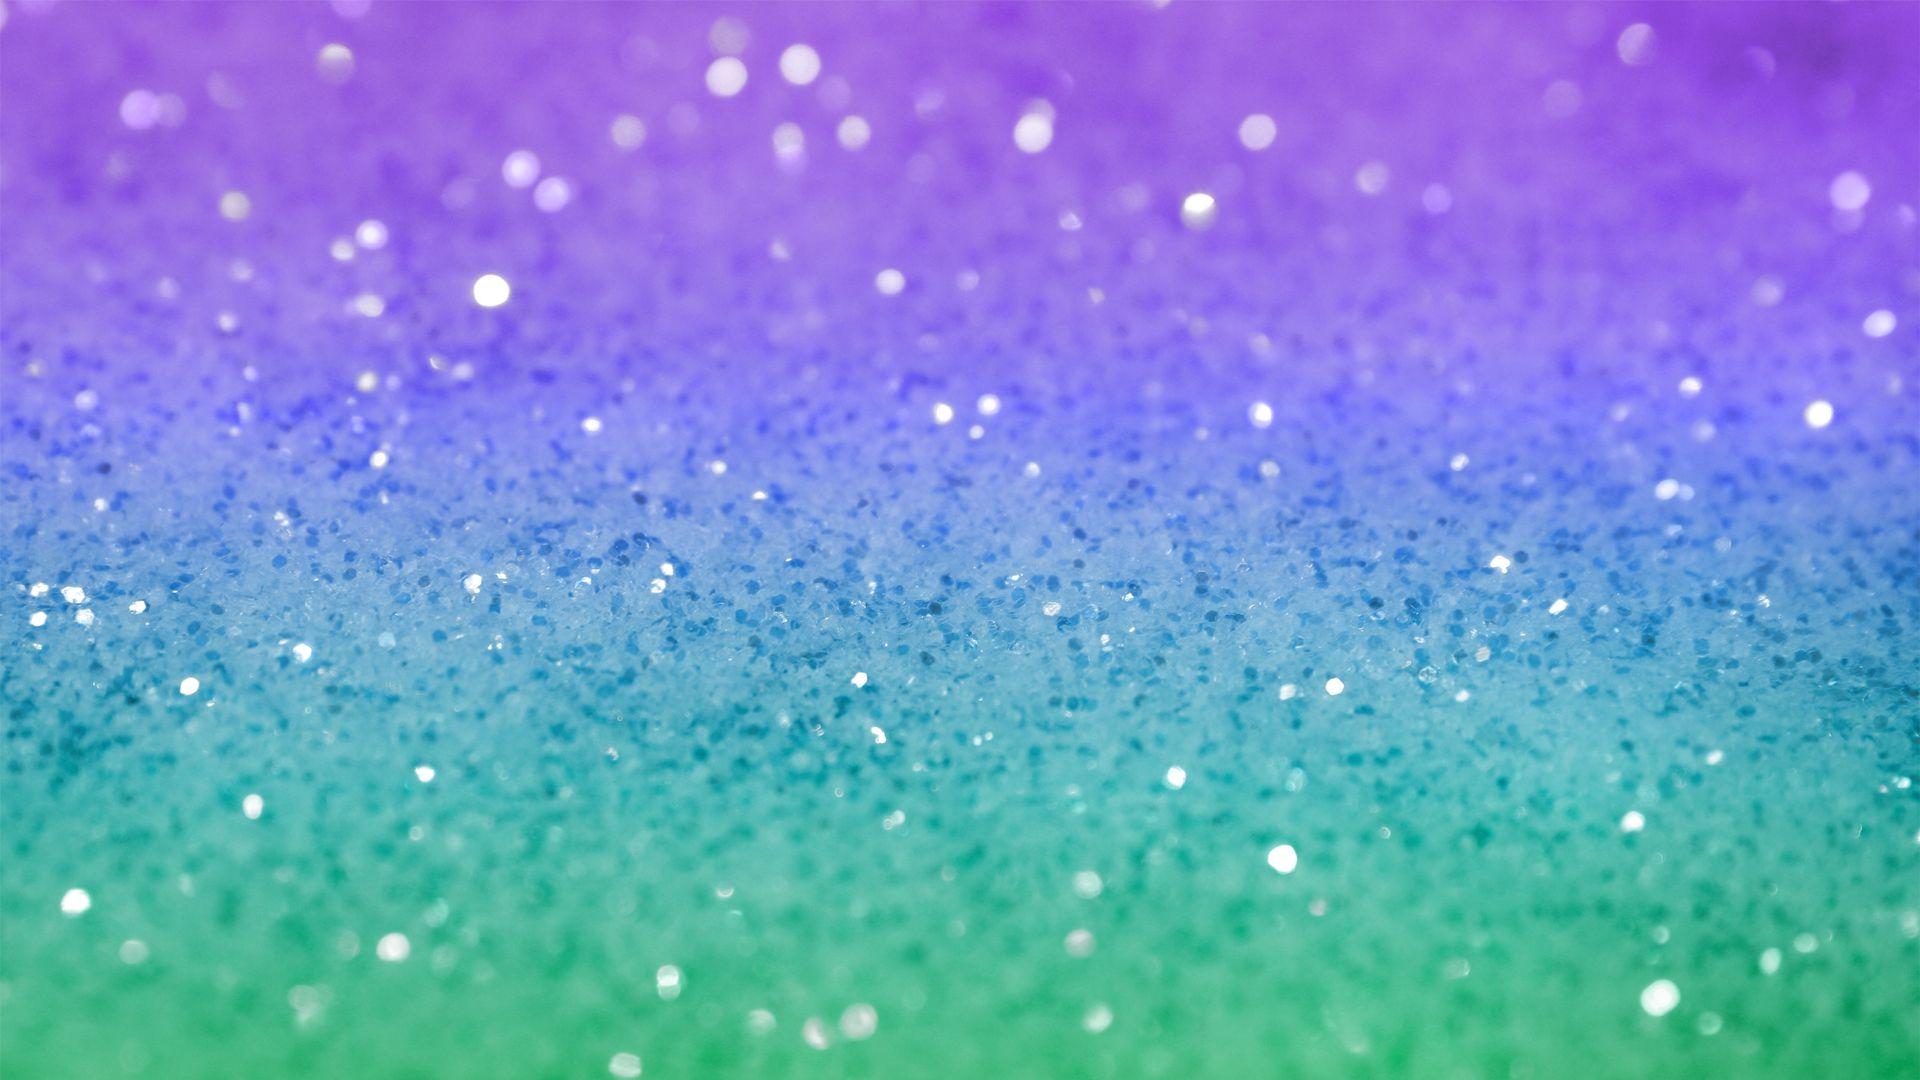 glitter wallpapers hd download cool image tablet backgrounds.